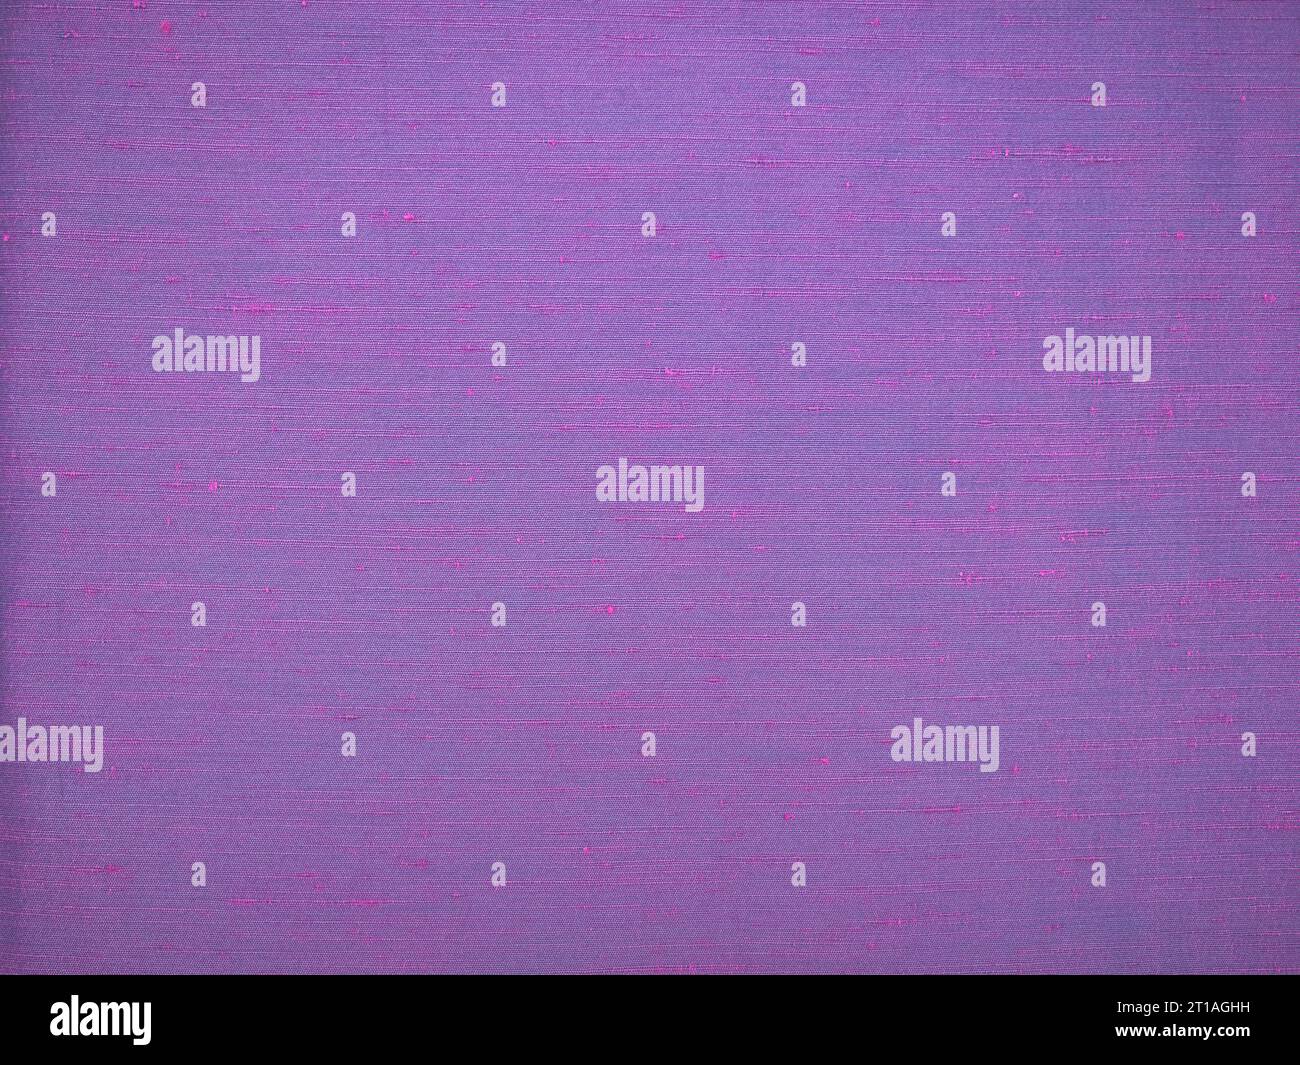 Image close up showing texture of purple dupioni raw silk. Striped slubby texture. For background with text or detailed example. Stock Photo